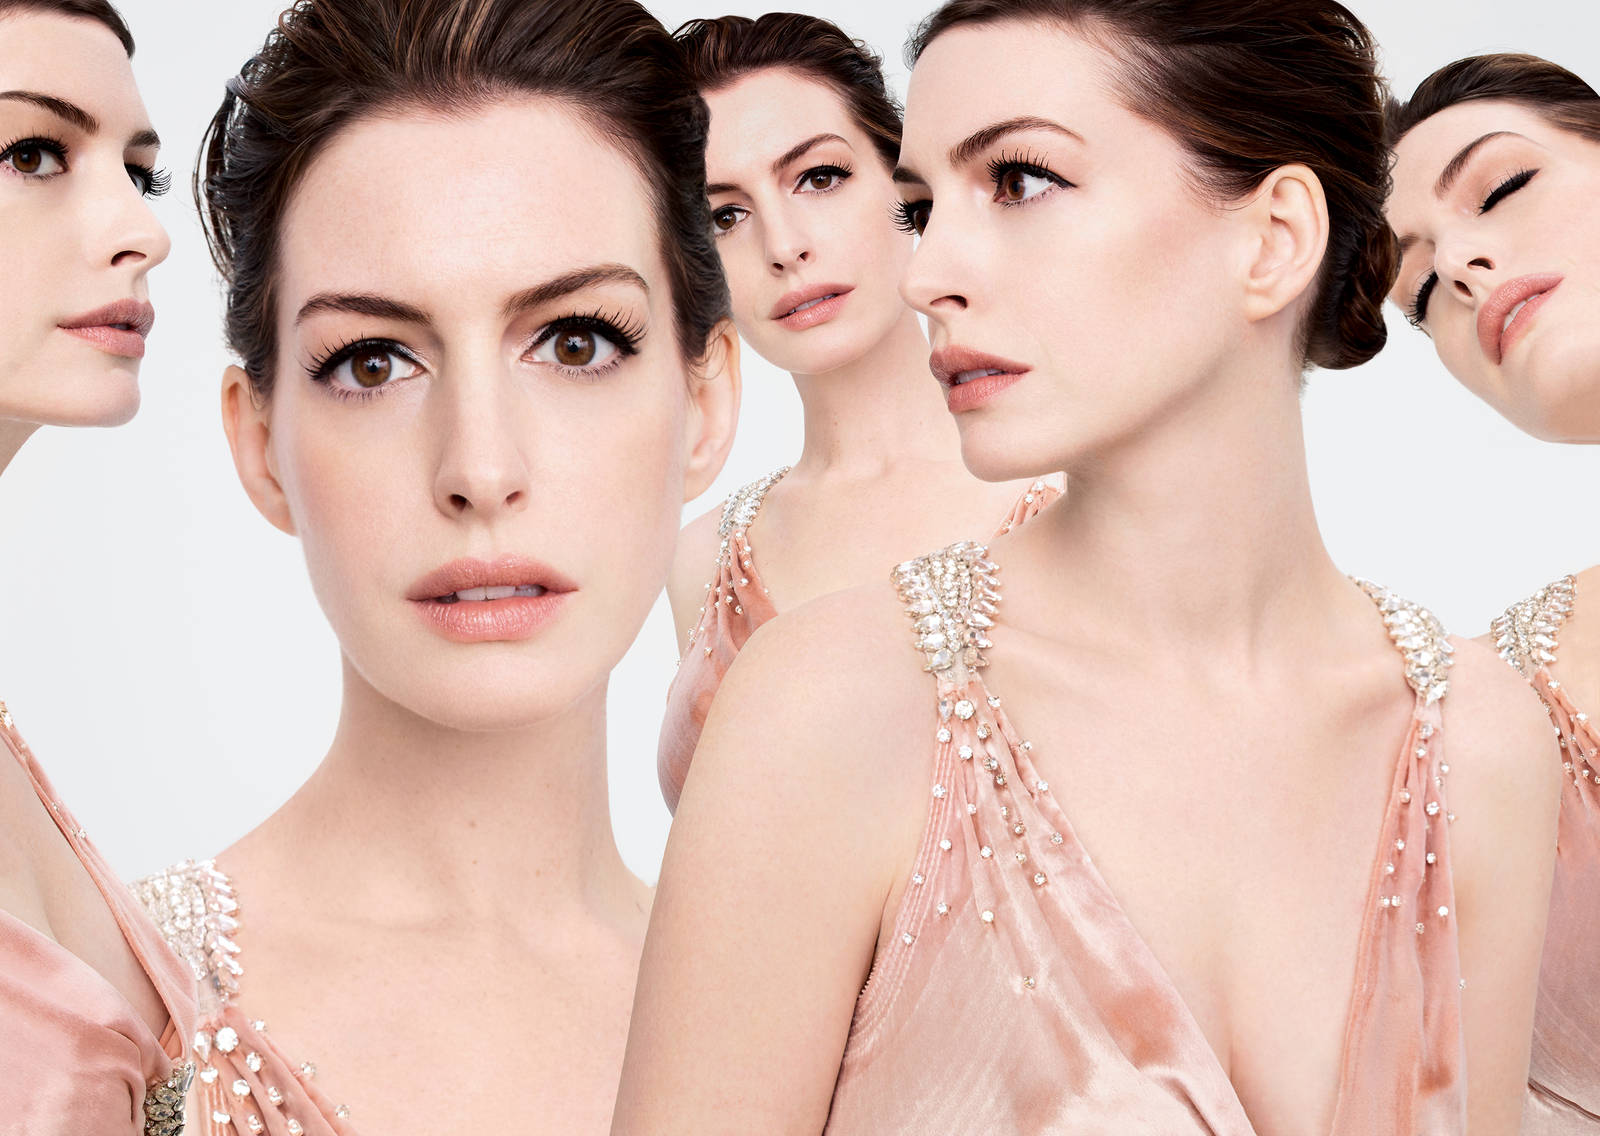 Anne Hathaway Looking Gorgeously Glamorous Wallpaper